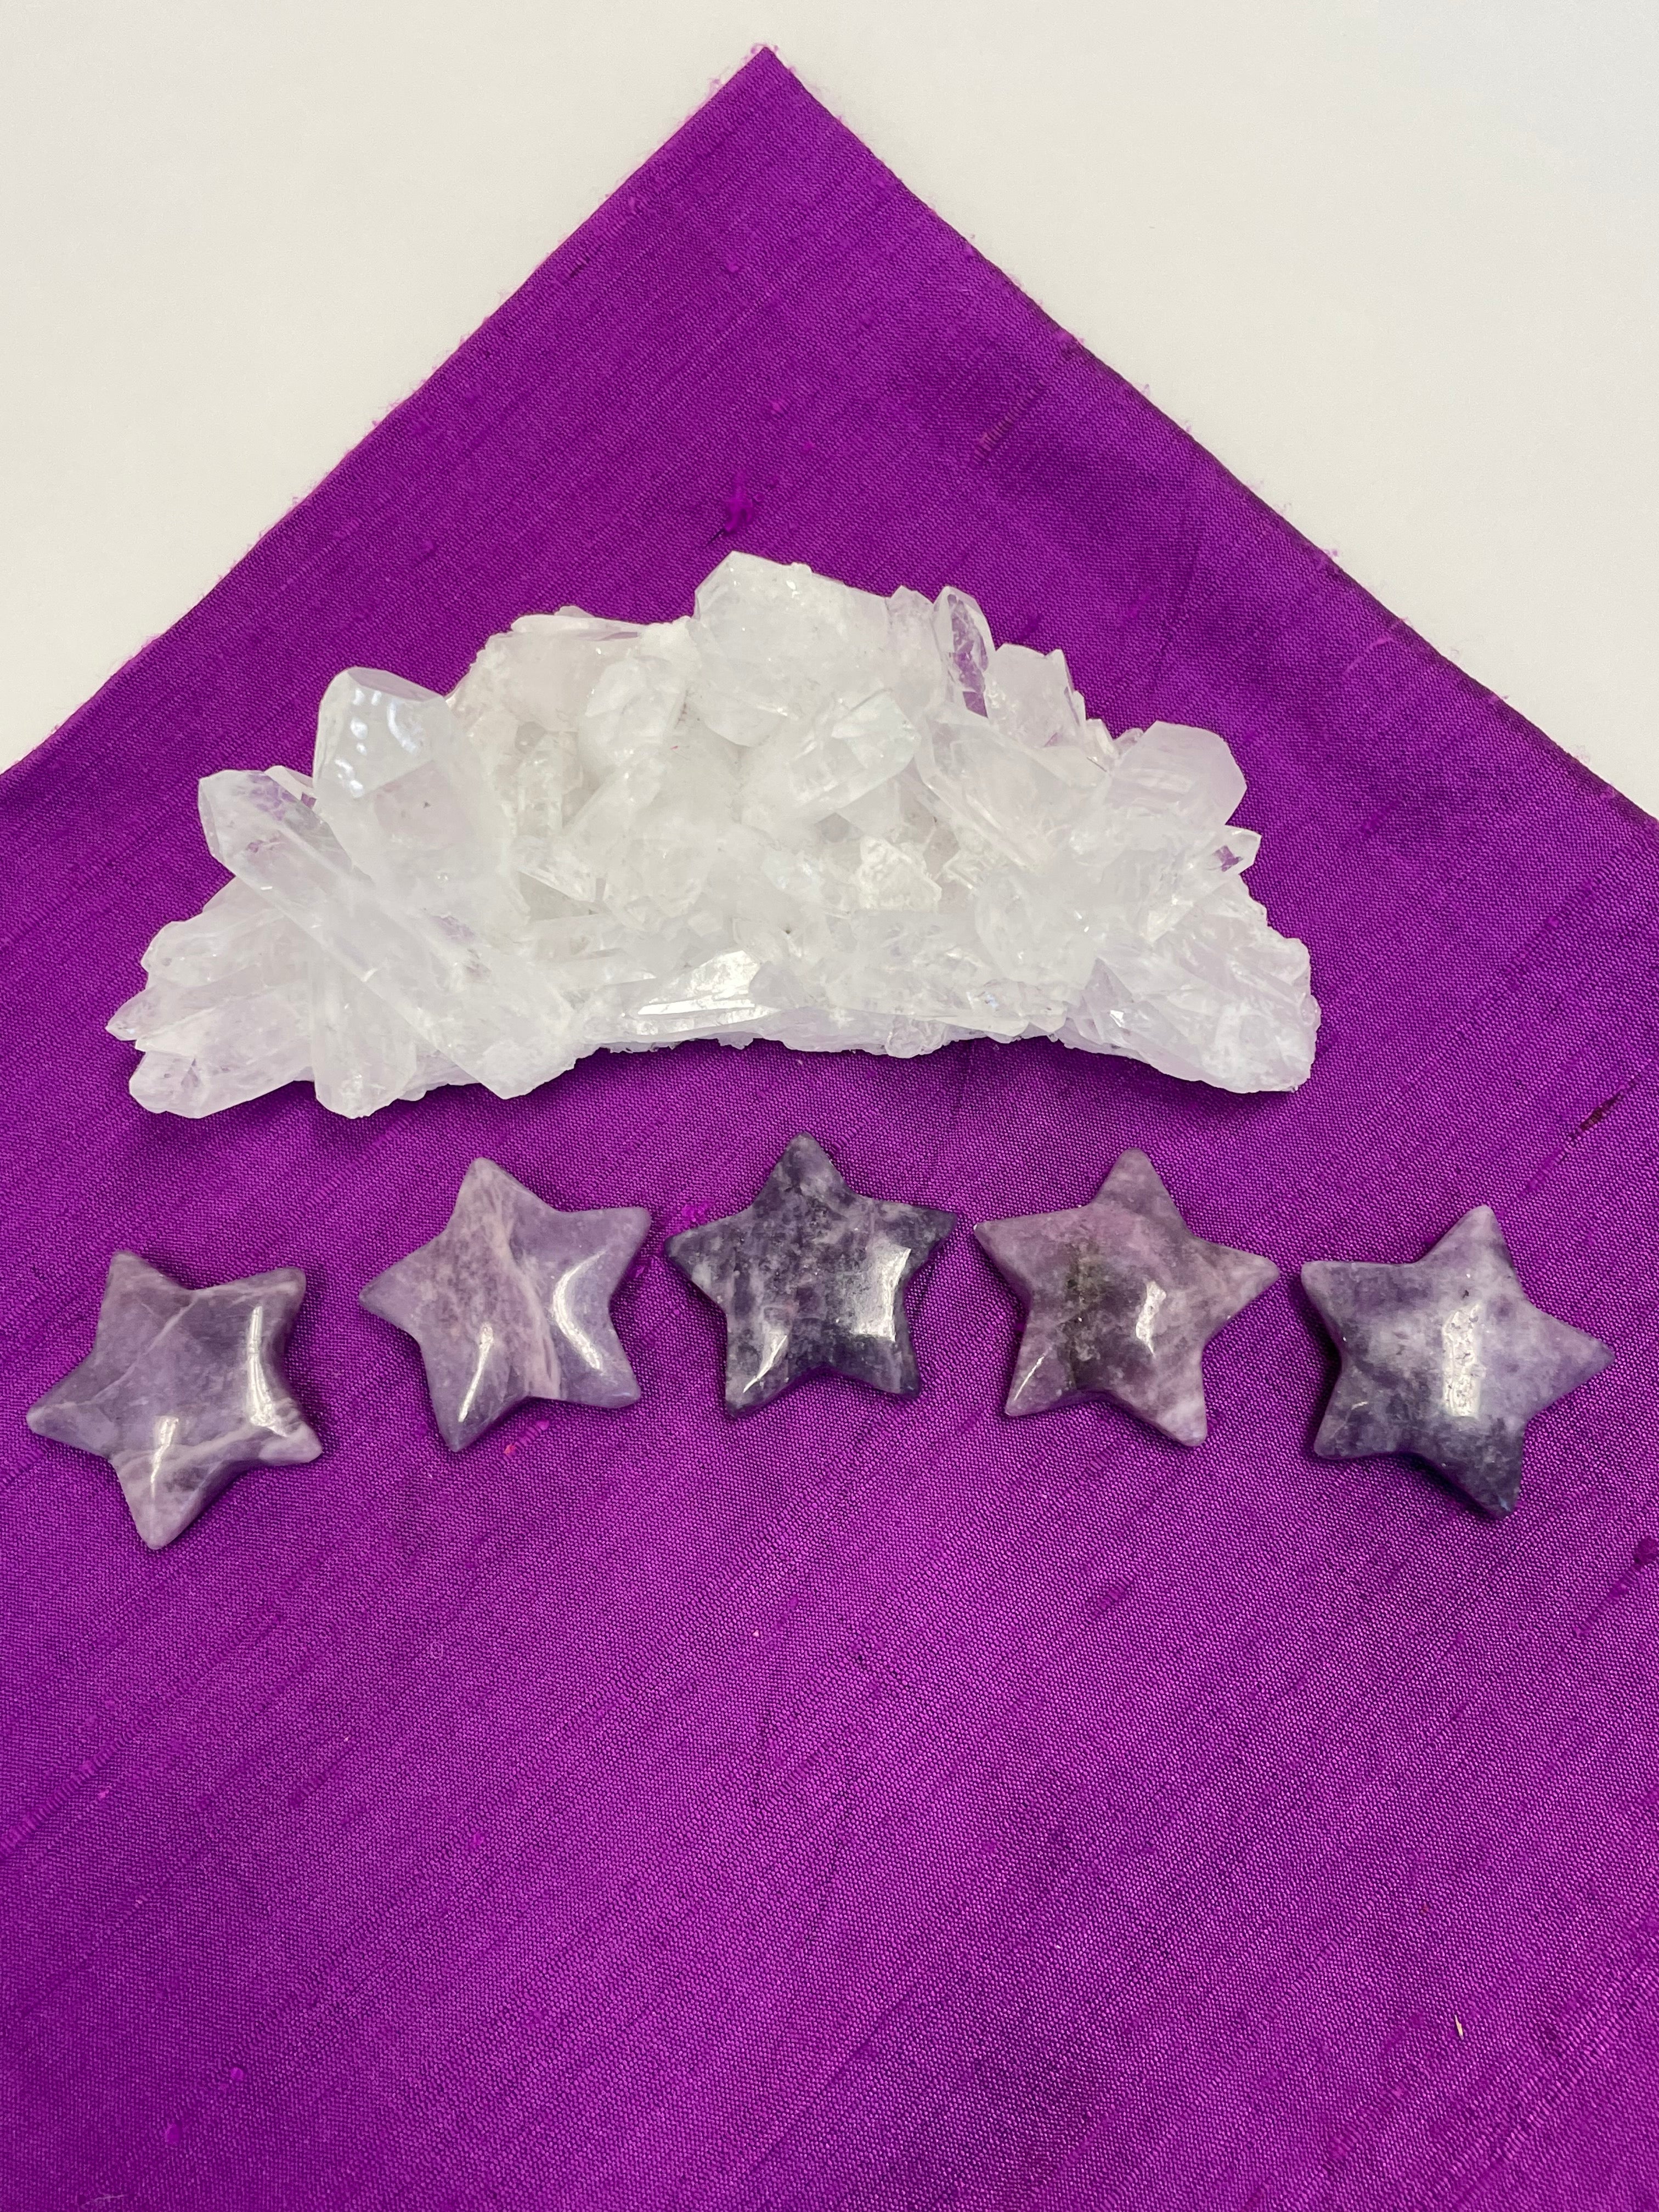 View of several lepidolite stars. This lovely little Lepidolite star can be used for meditation, healing, for your altar, on your computer to clear EMRs, or as décor for any room in your home or office. Easy to slip right into your pocket so you can take the energy of lepidolite everywhere you go. Approximately 1¼". Cost is $6 for one star.